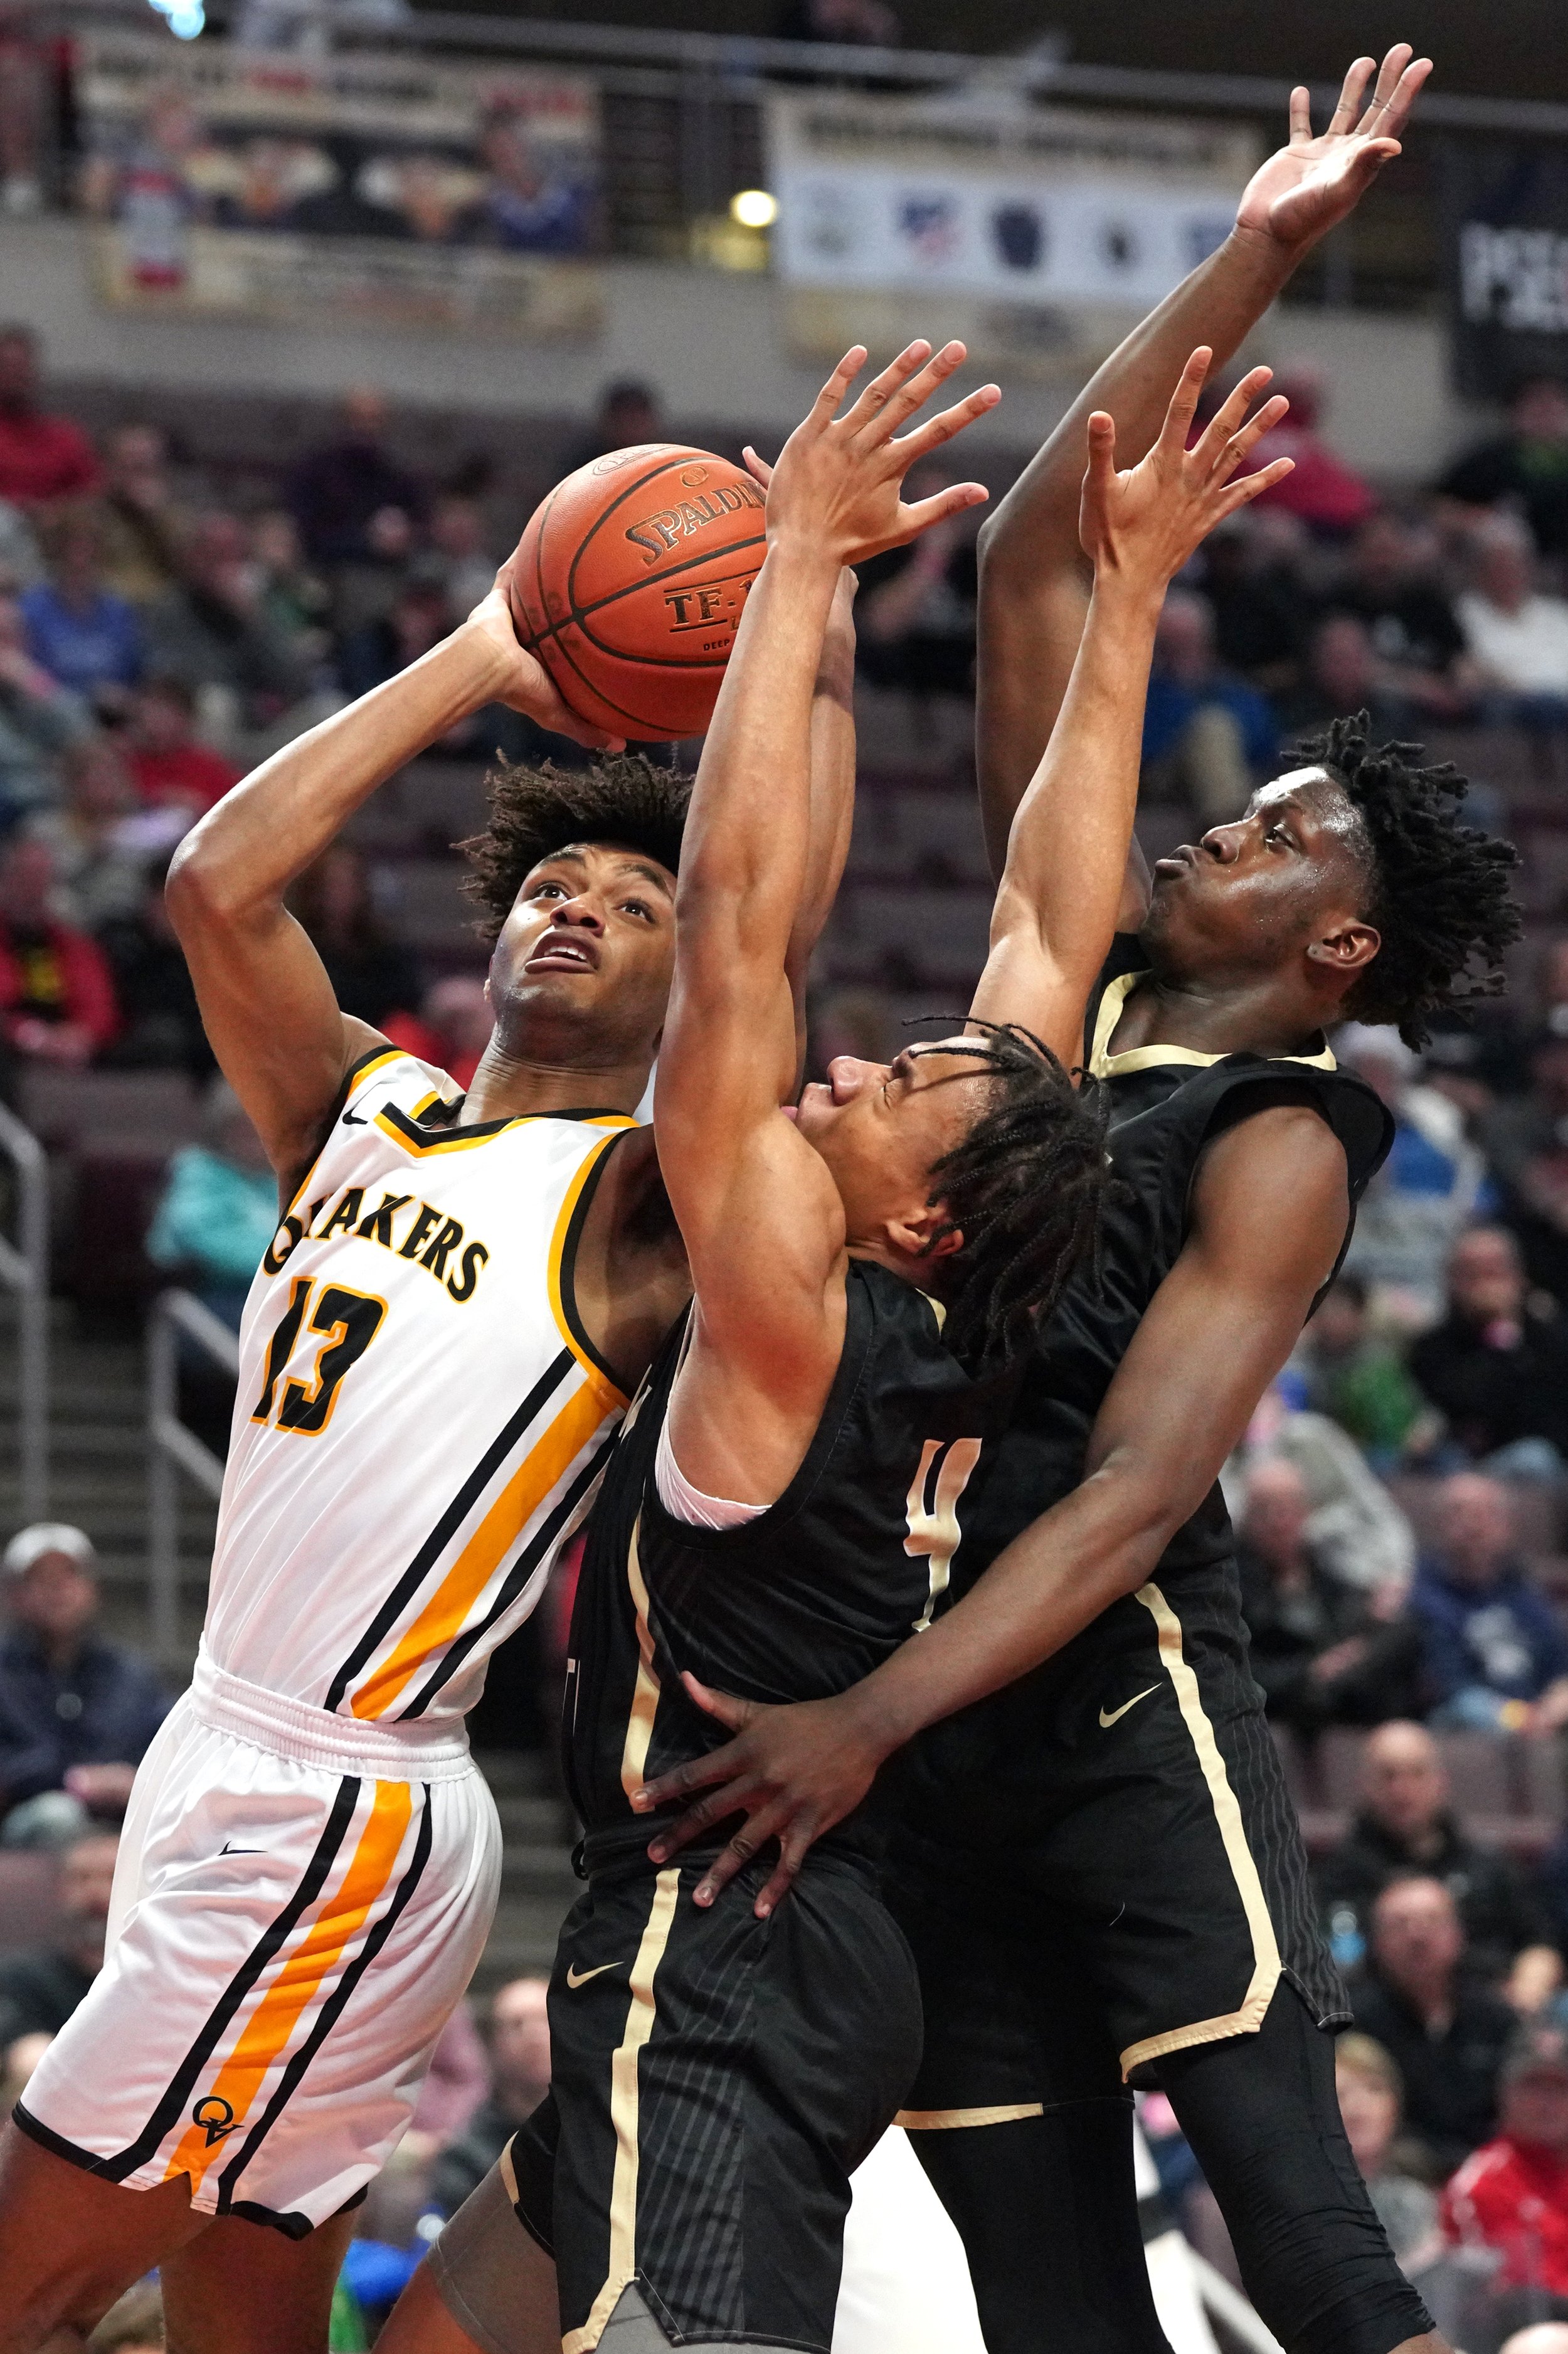  Quaker Valley’s Markus Frank, left, looks to the basket as Neumann-Goretti’s Masud Stewart, middle, and Sultan Adewale try to block him in the PIAA 4A boys basketball championship on Thursday, March 24, 2022, at Giant Center in Hershey, Pa. Quaker V